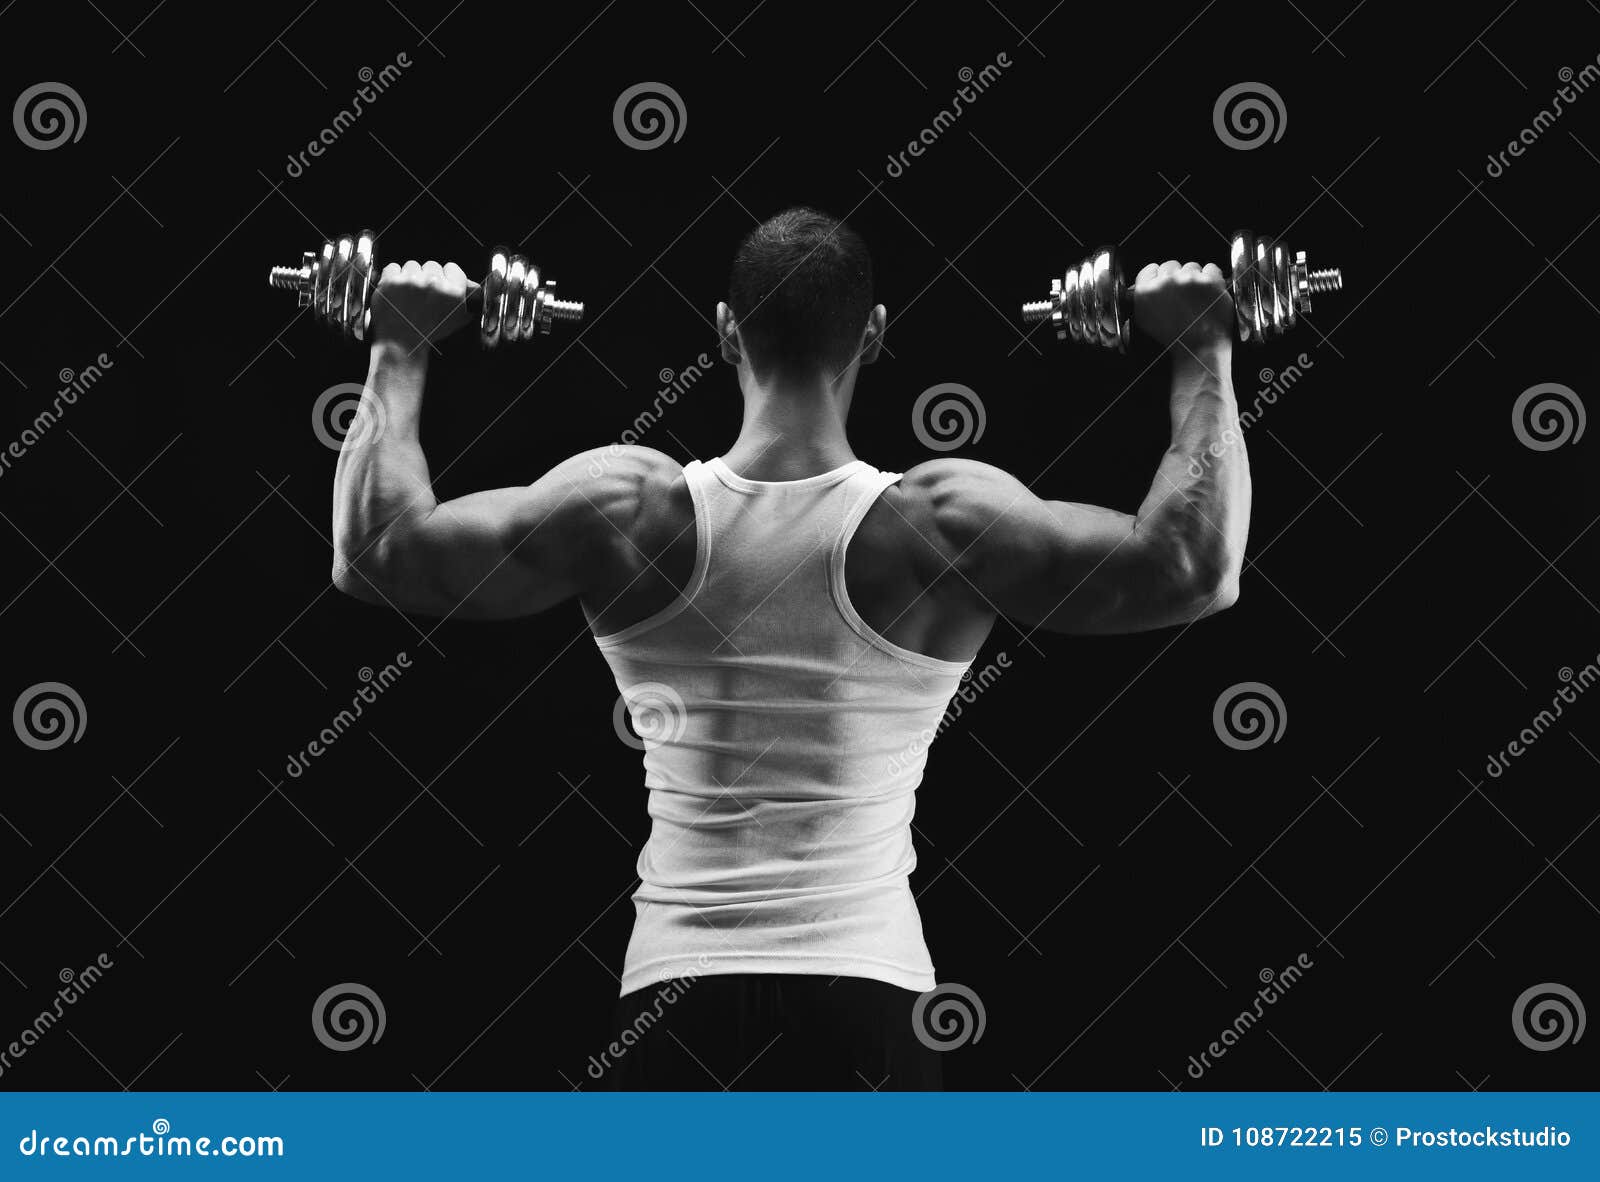 Muscular Man Exercising With Dumbbells Stock Image - Image 